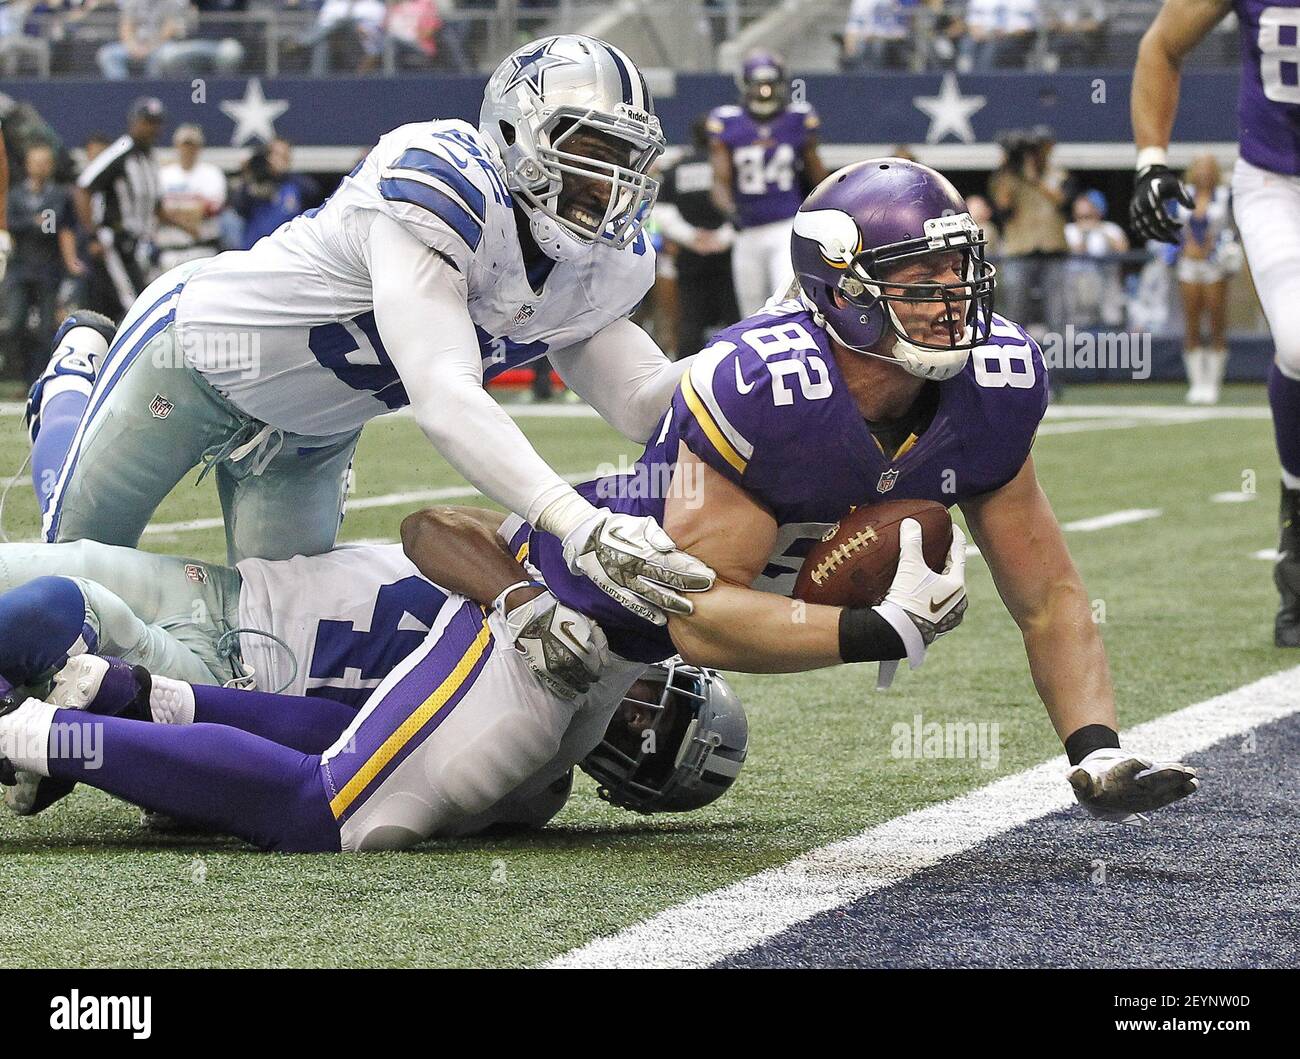 Dallas Cowboys linebacker Justin Durant and safety Barry Church can't prevent the Minnesota Vikings' Kyle Rudolph from reaching the end zone for a touchdown in the third quarter at AT&T Stadium in Arlington, Texas, Sunday, October 3, 2013. The Cowboys defeated the Vikings, 27-23. (Photo by Ron T. Ennis/Fort Worth Star-Telegram/MCT/Sipa USA) Stock Photo